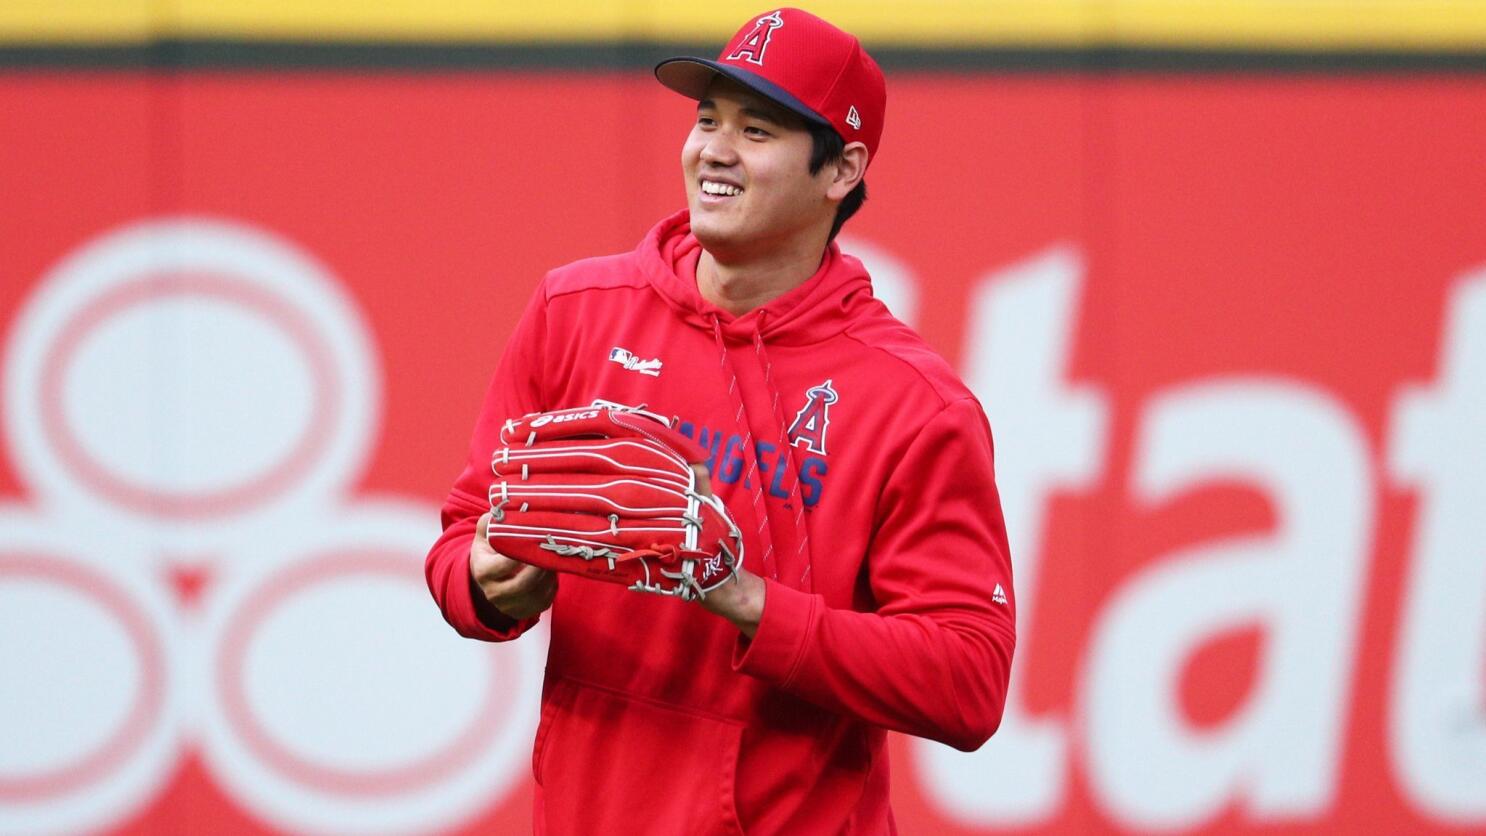 Mariners' pursuit of Japanese two-way star Shohei Ohtani will need